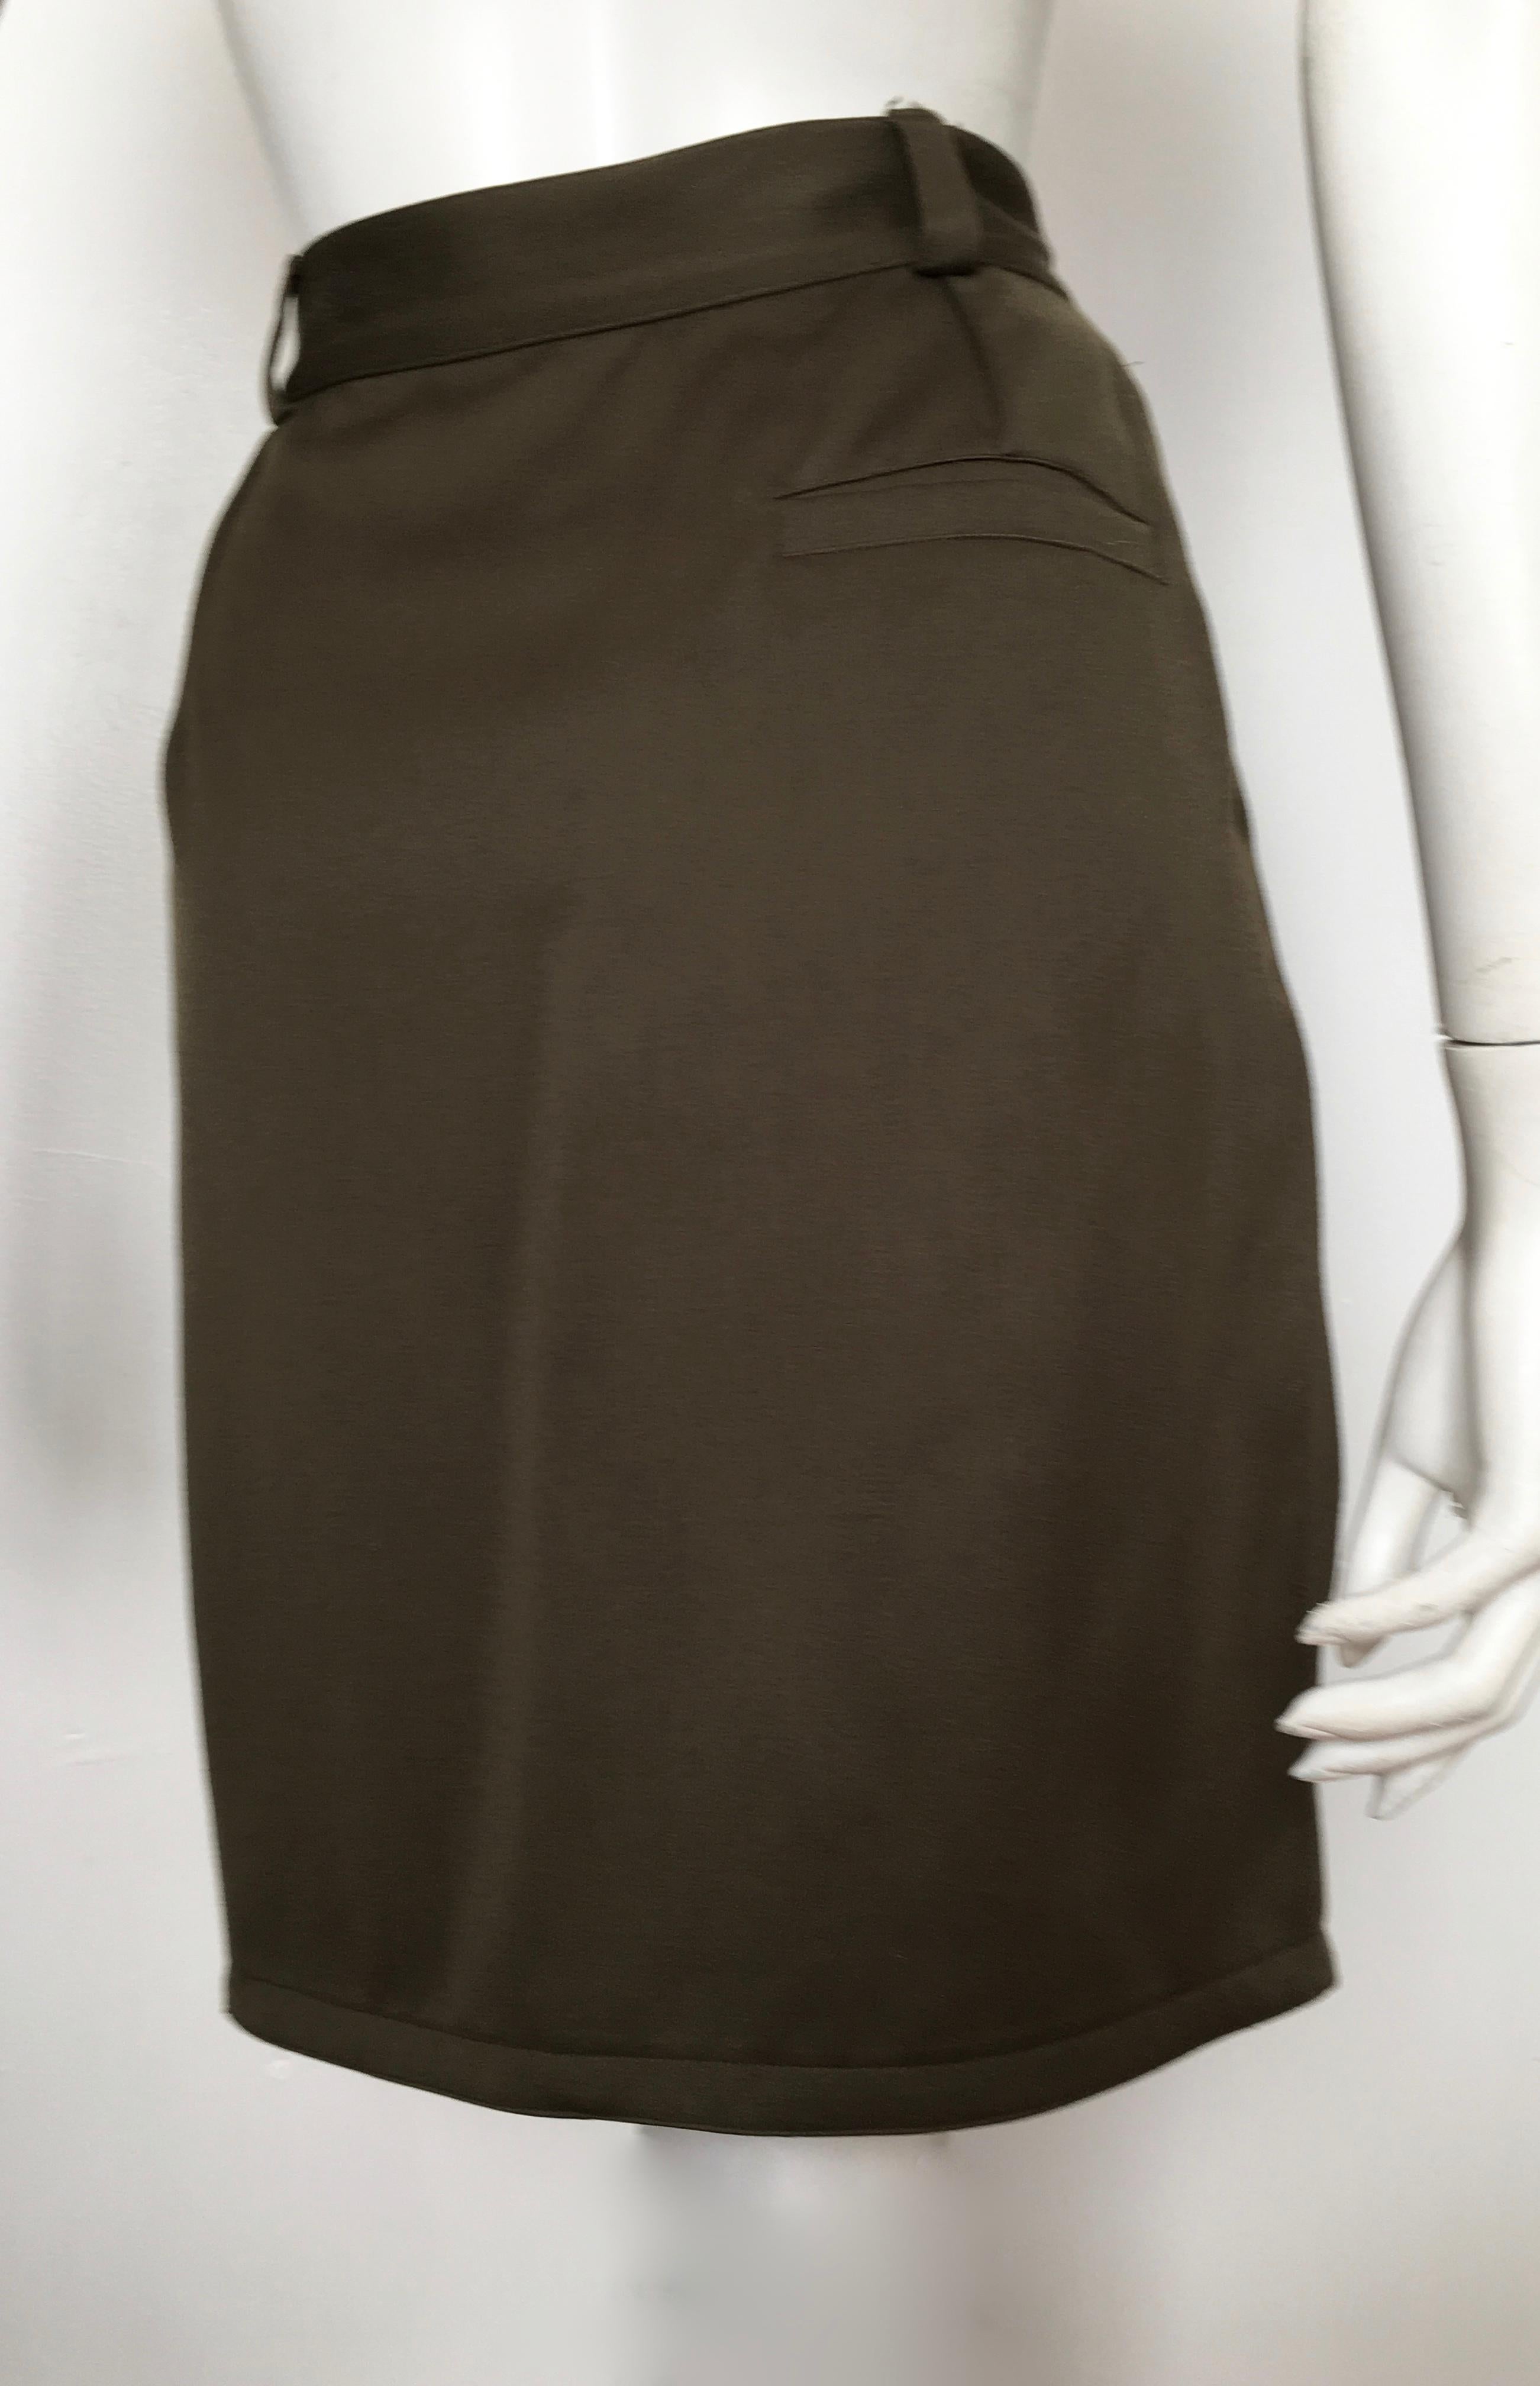 Black Gianni Versace 1980s Olive Wool Skirt with Pockets Size 6. For Sale